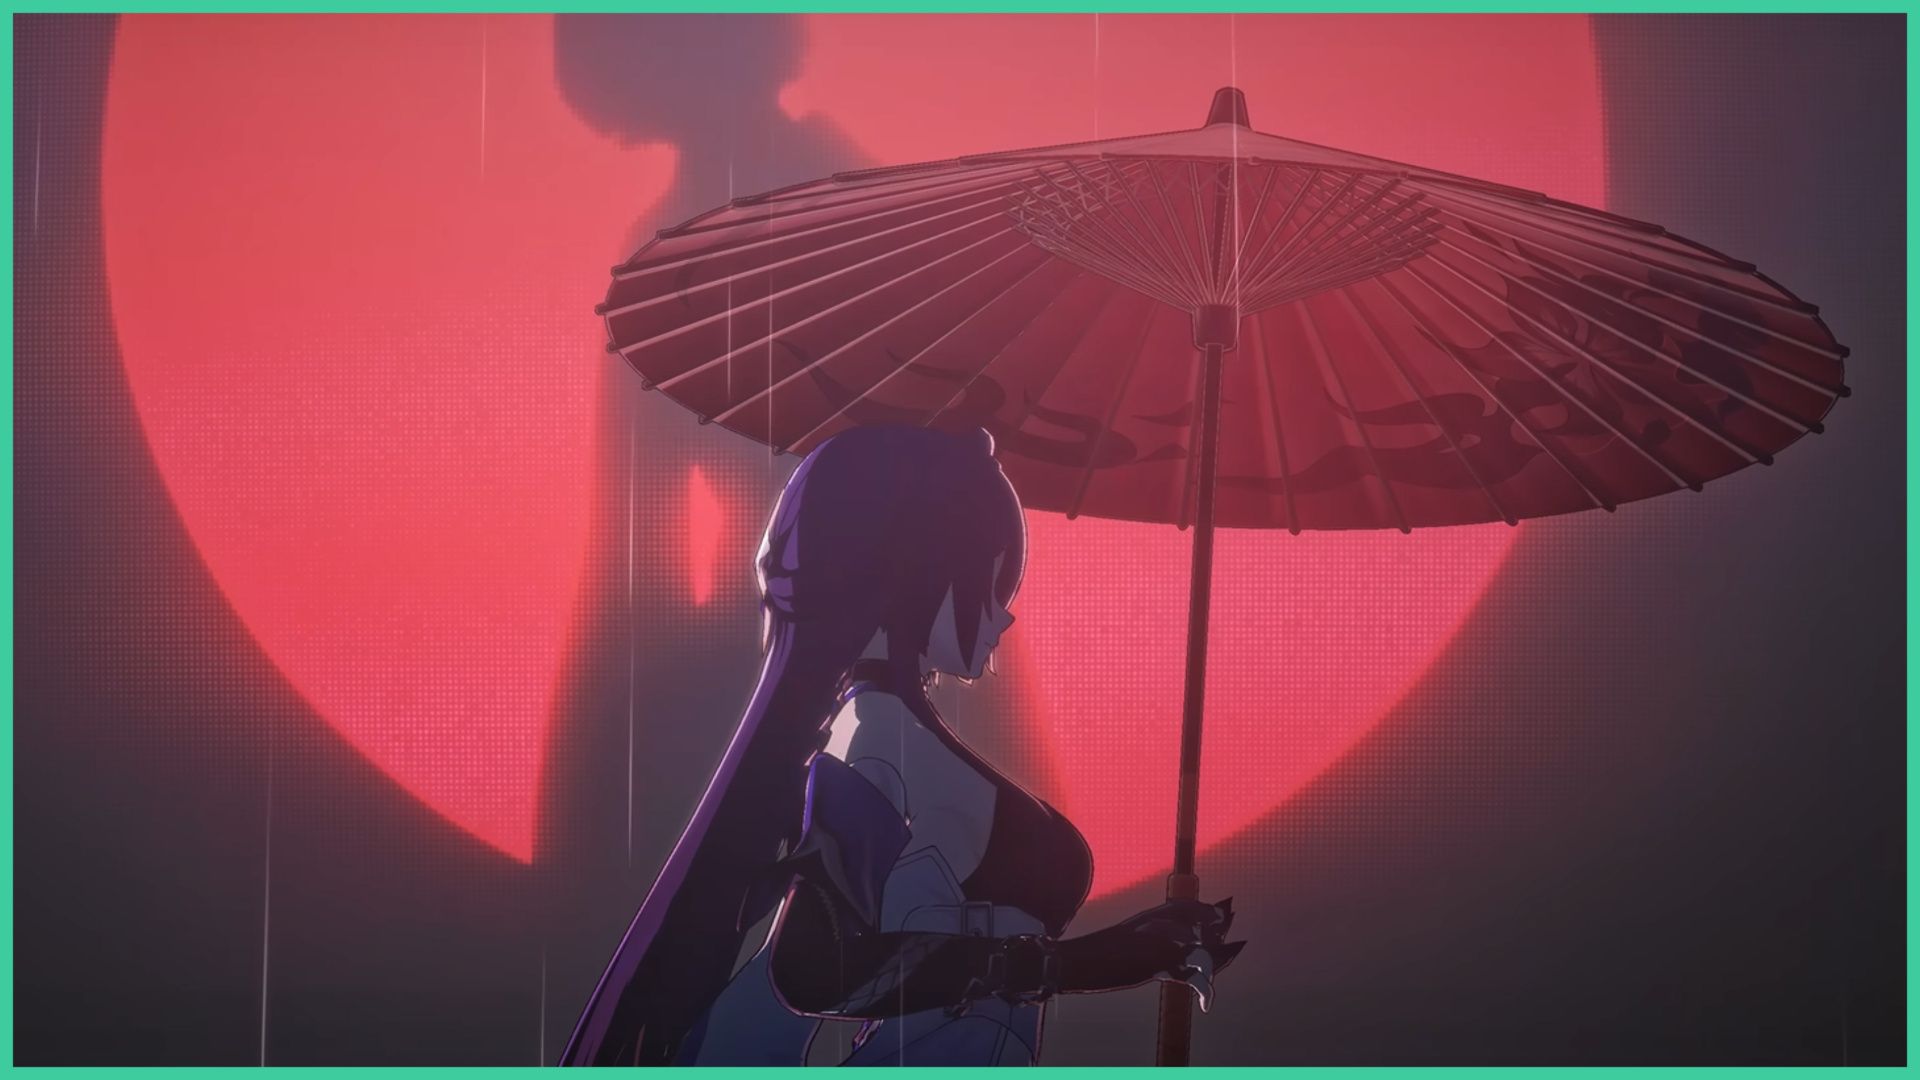 feature image for our honkai star rail acheron tier list, it's a screenshot from acheron's character trailer, as she walks to the right while holding a parasol, with a glowing red circle on the wall behind her with the silhouette of a body as the rain falls